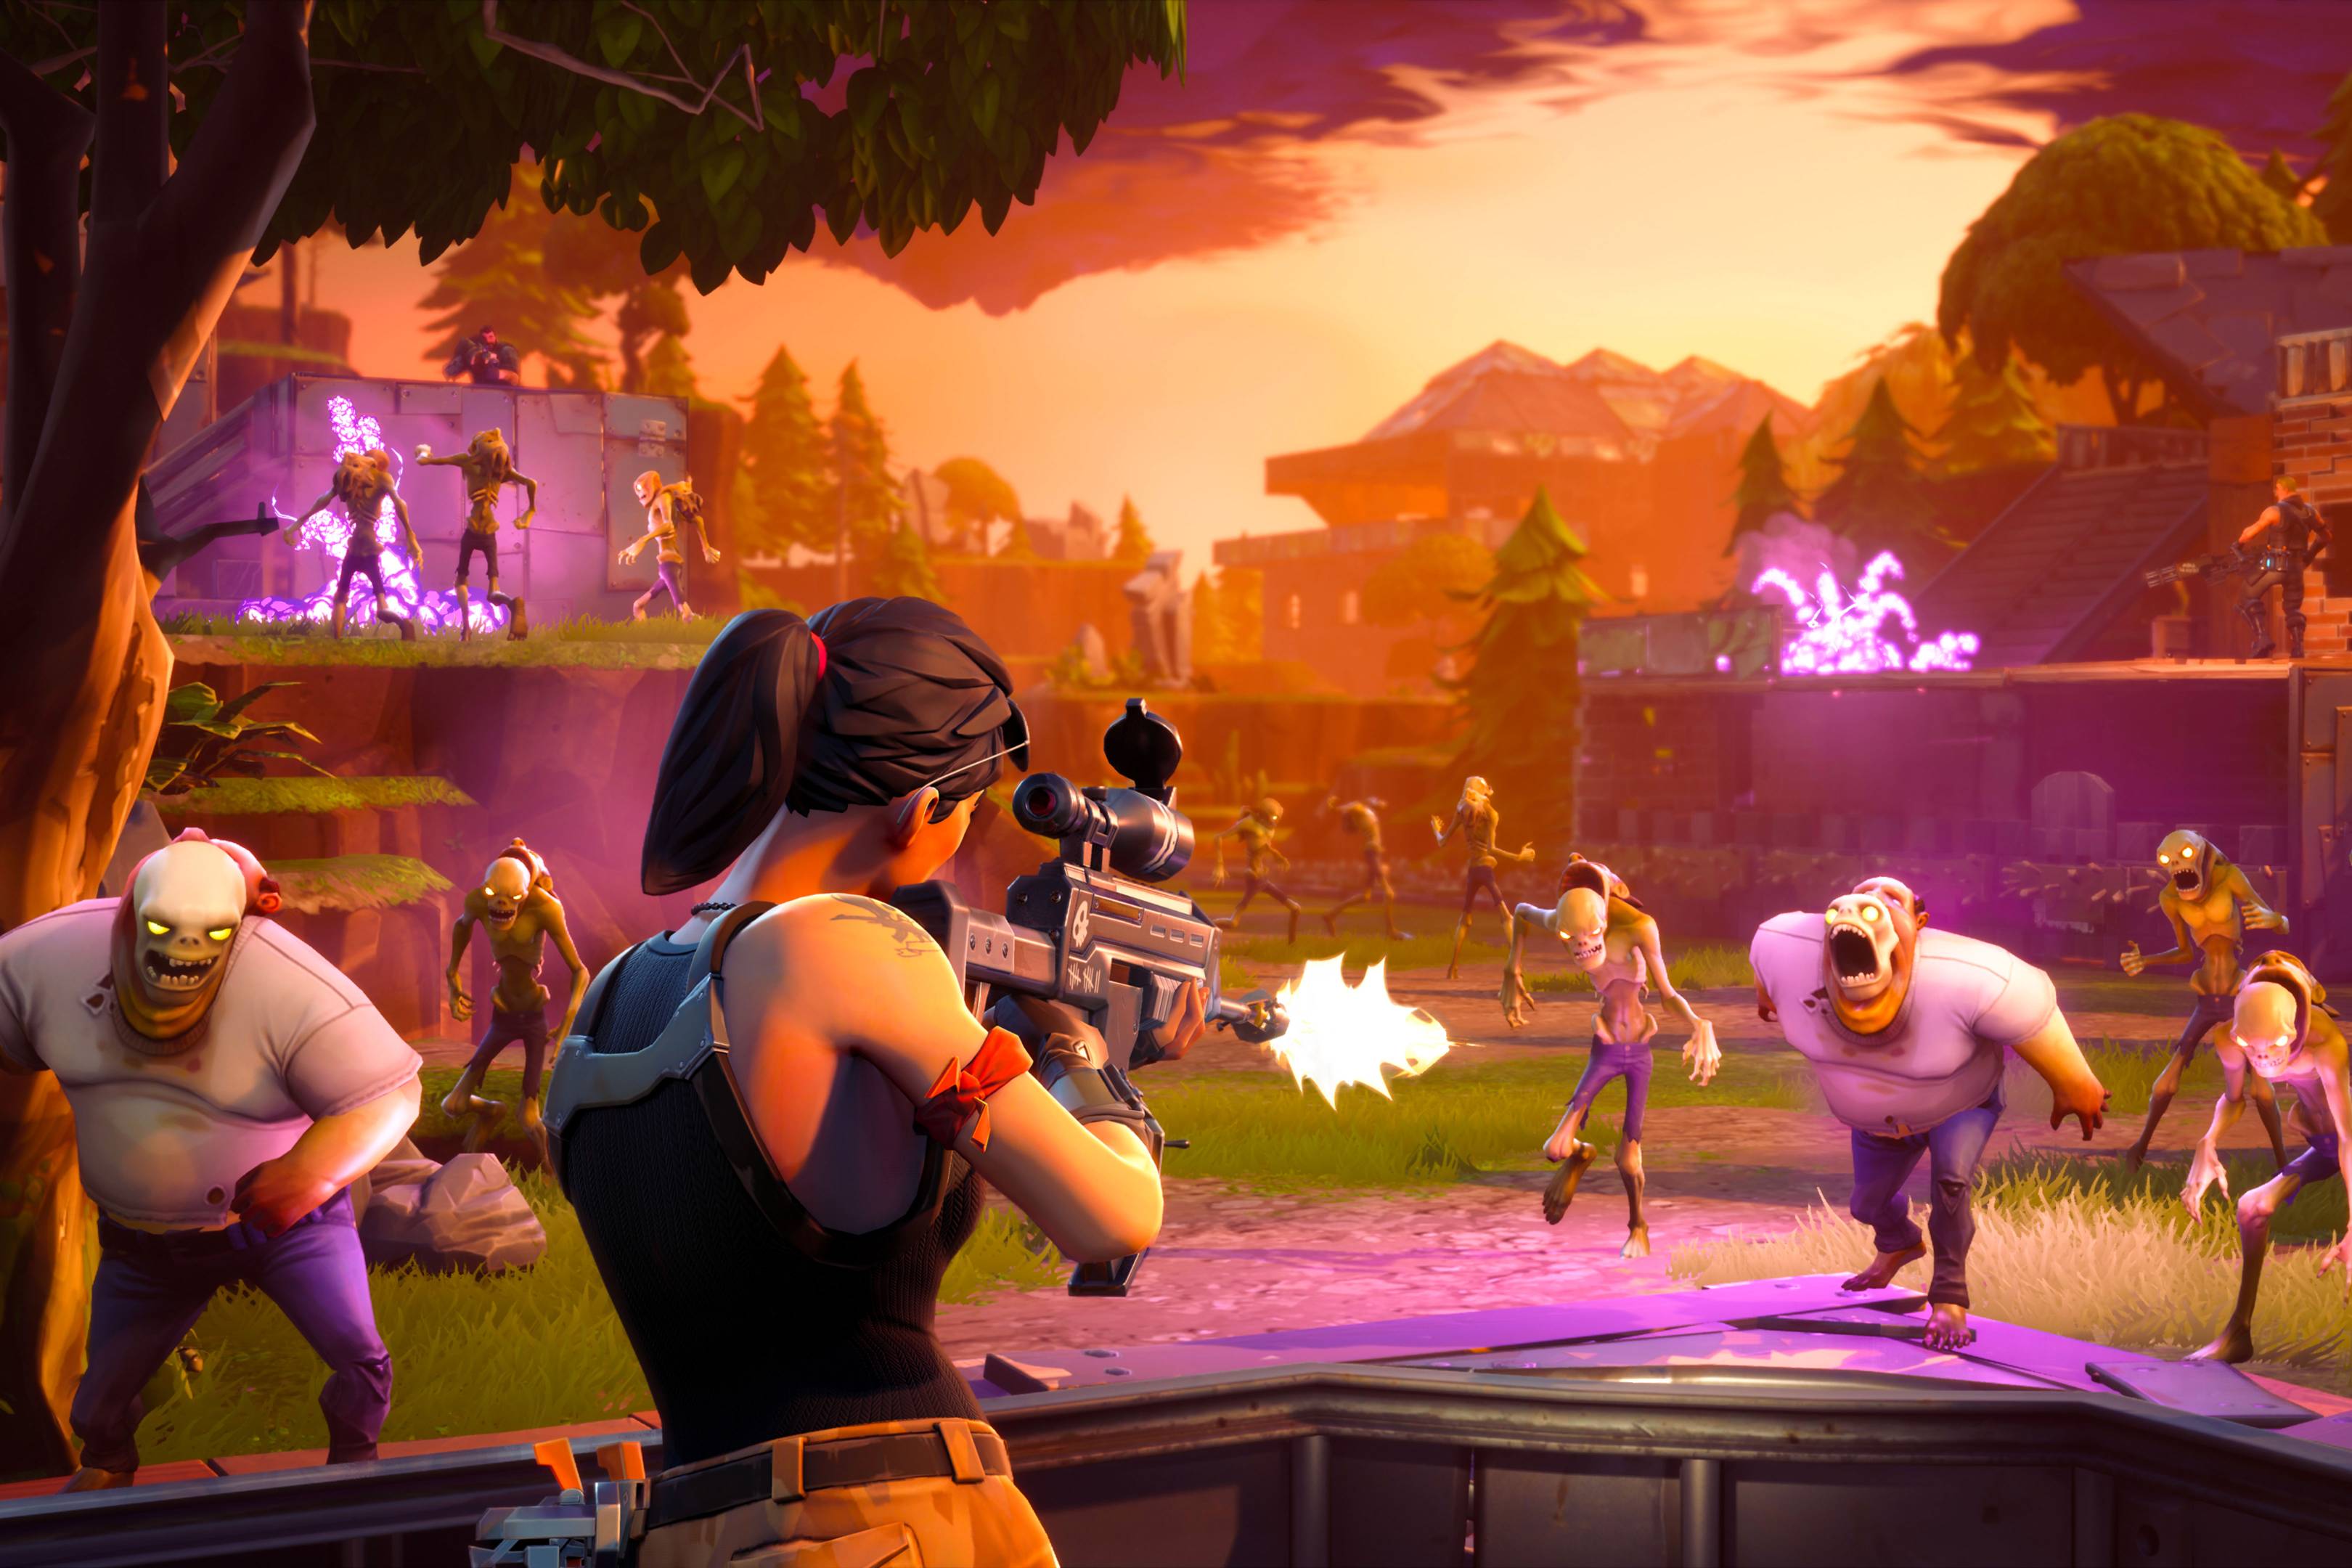 fortnite shunning the android play store is a major security headache wired uk - how to download fortnite on samsung s8